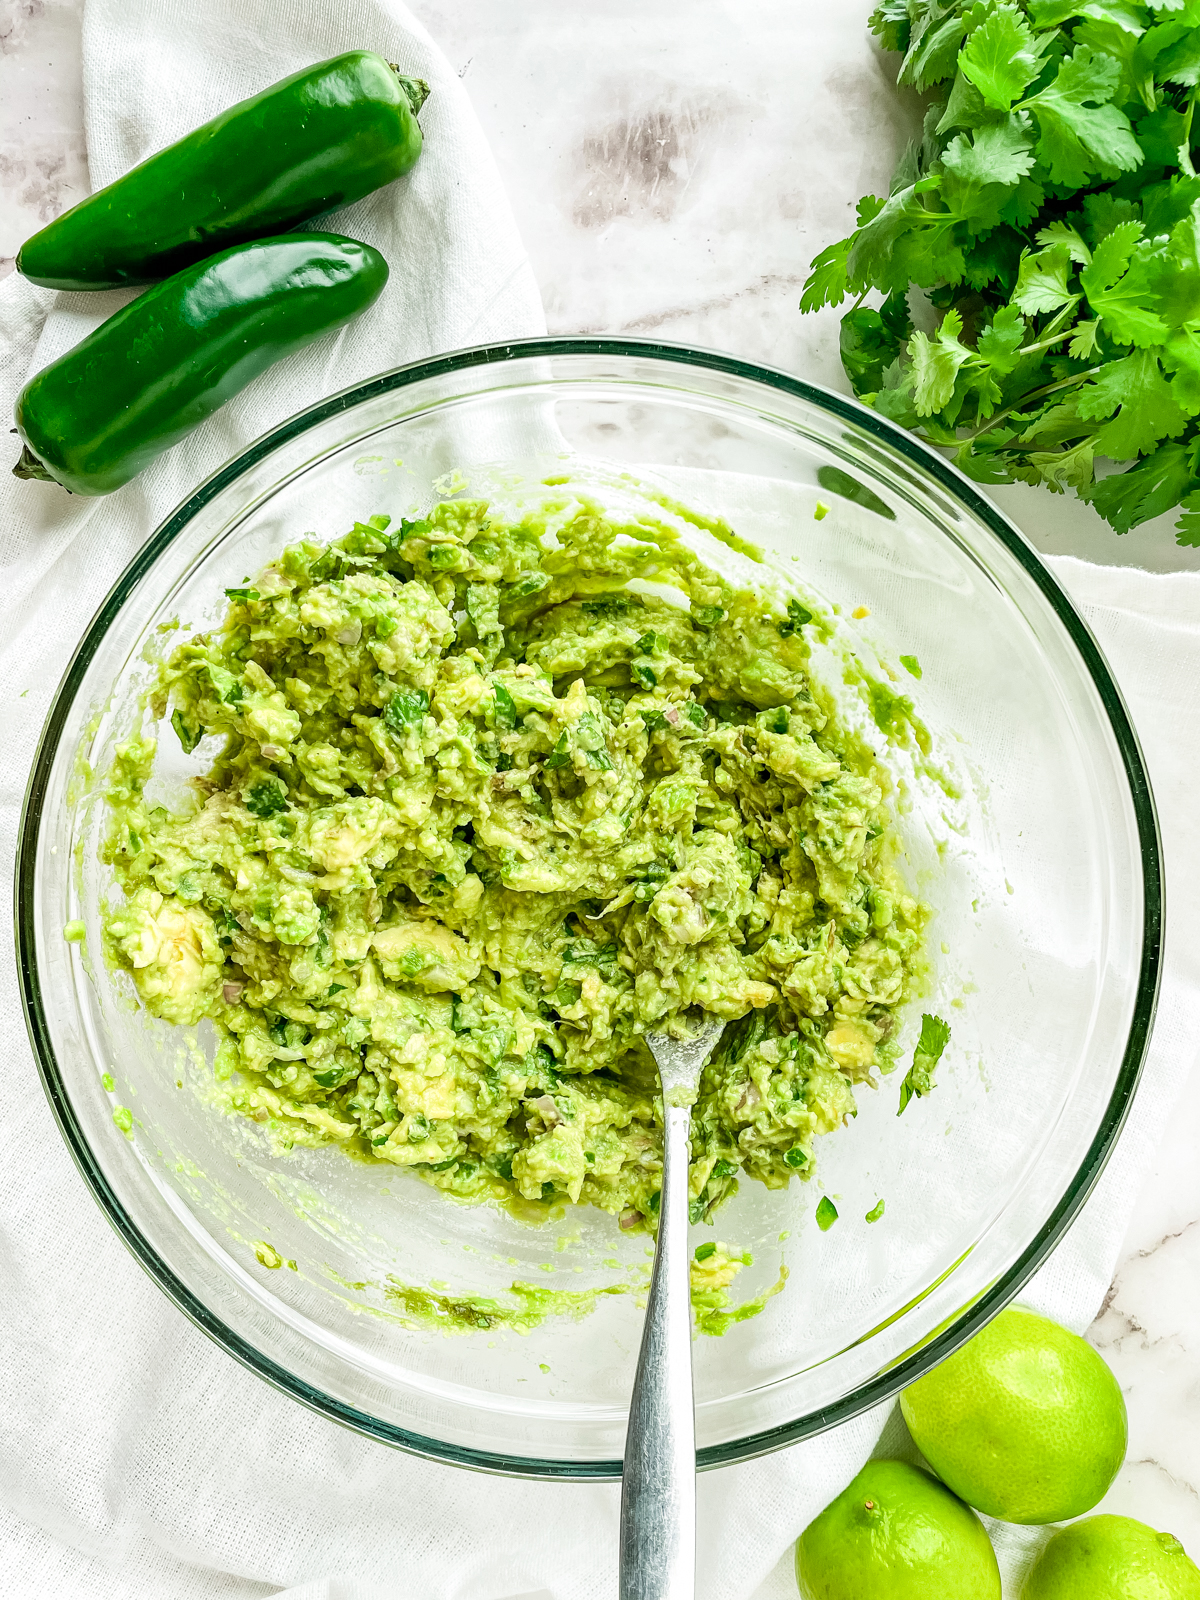 lime juice, cilantro salt and black pepper mixed into mashed avocados